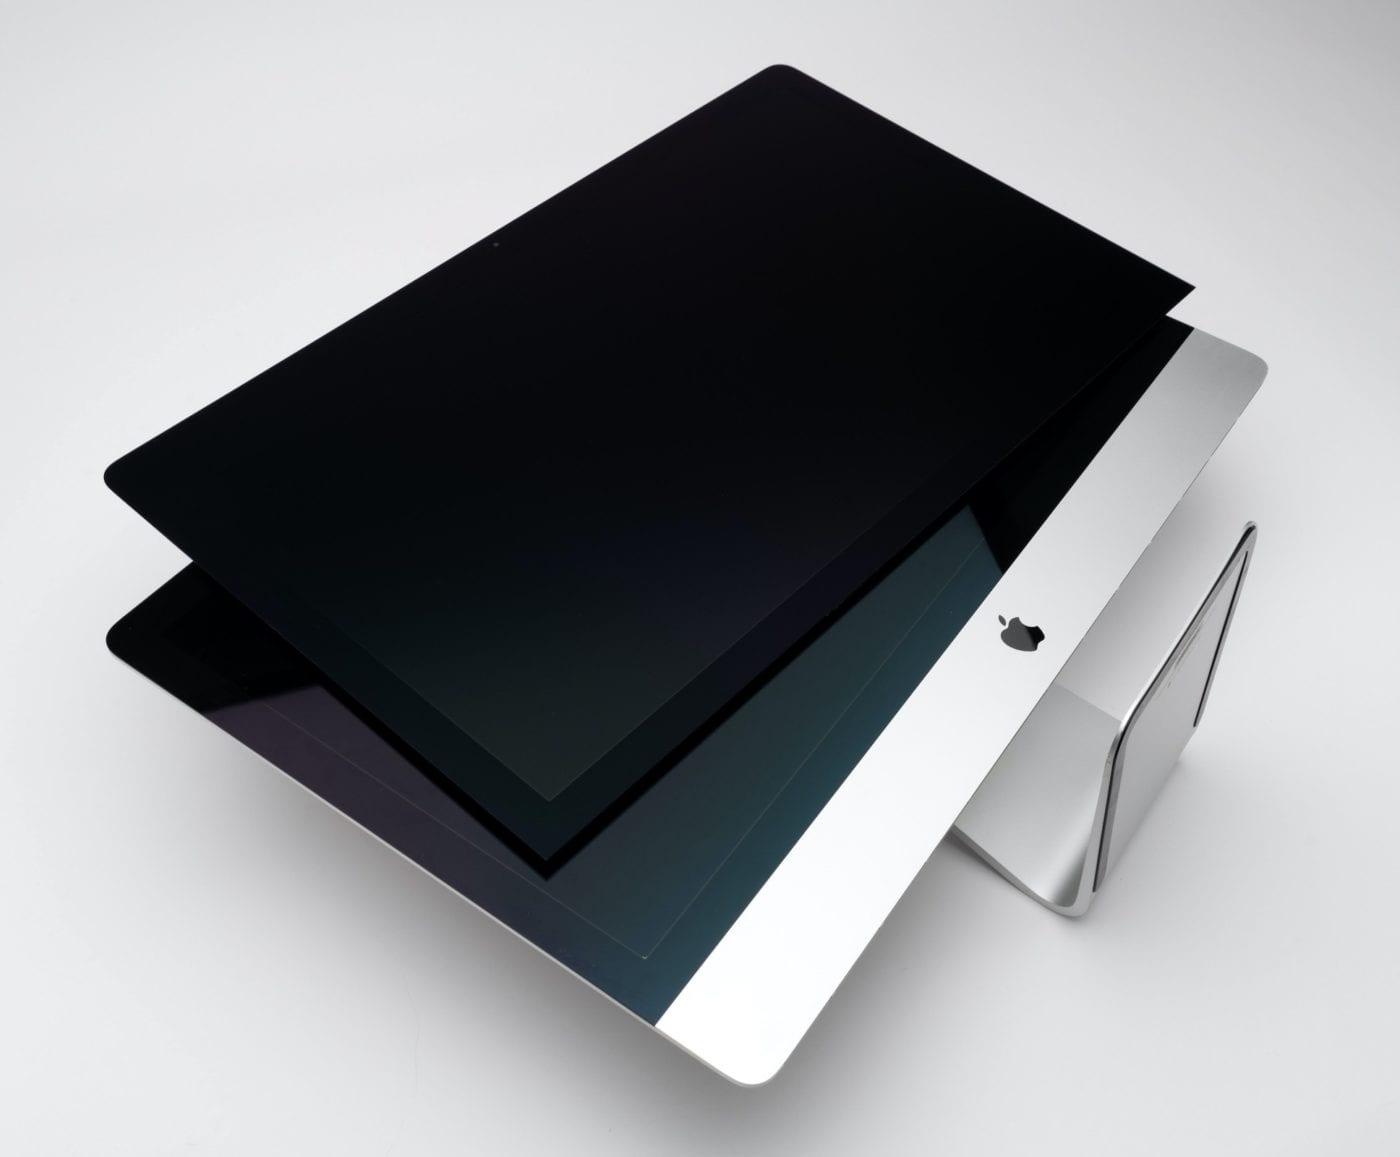 Apple's new nano-textured glass laying on top of the standard 2020 iMax 27" to contrast the difference.